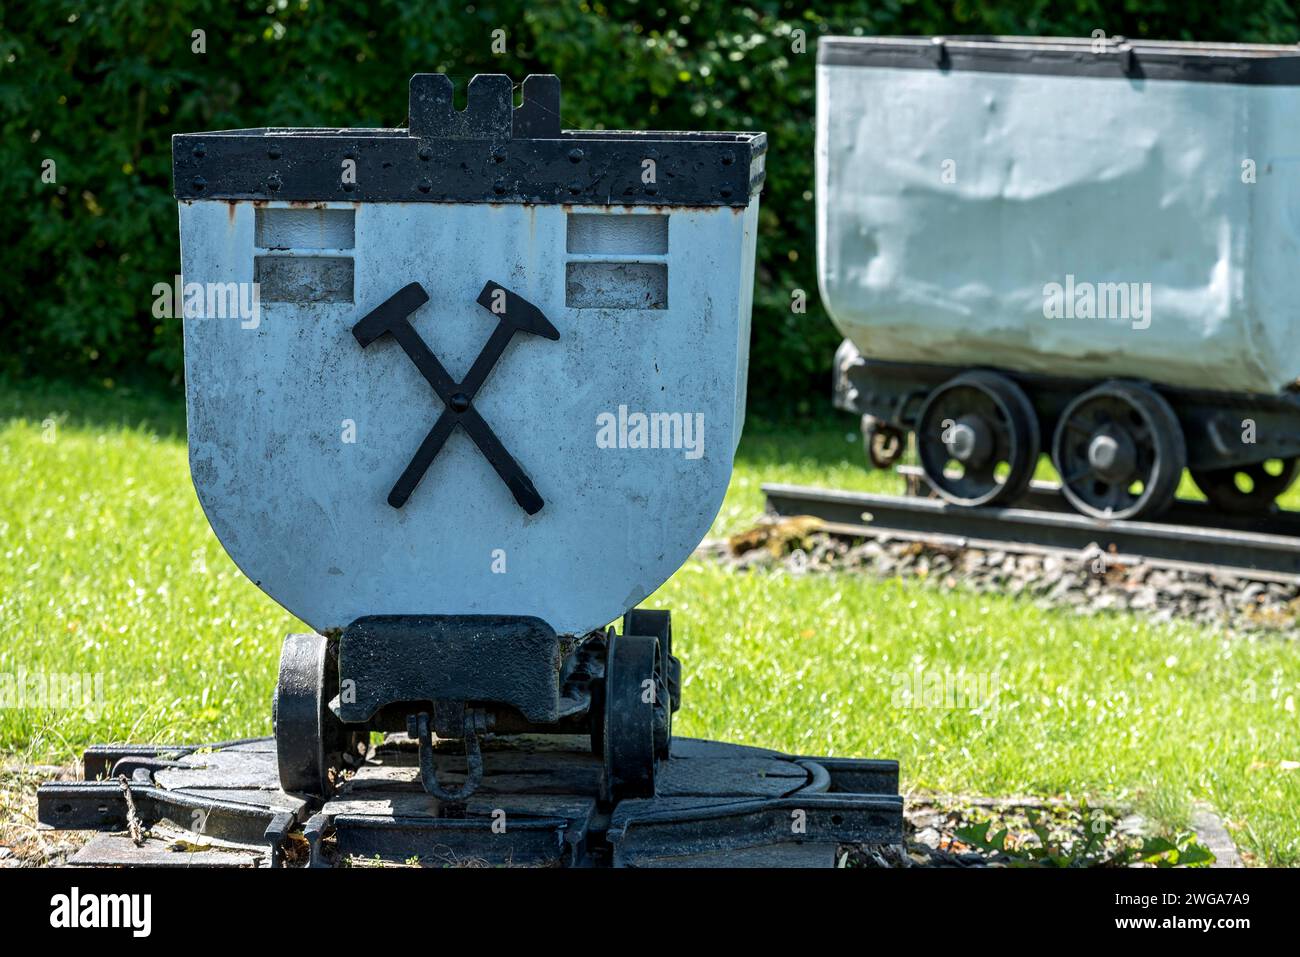 Trolleys for transporting brown coal underground, mining, mine wagon with hammer and iron symbol, wagon, open-air museum at Weckesheim railway Stock Photo